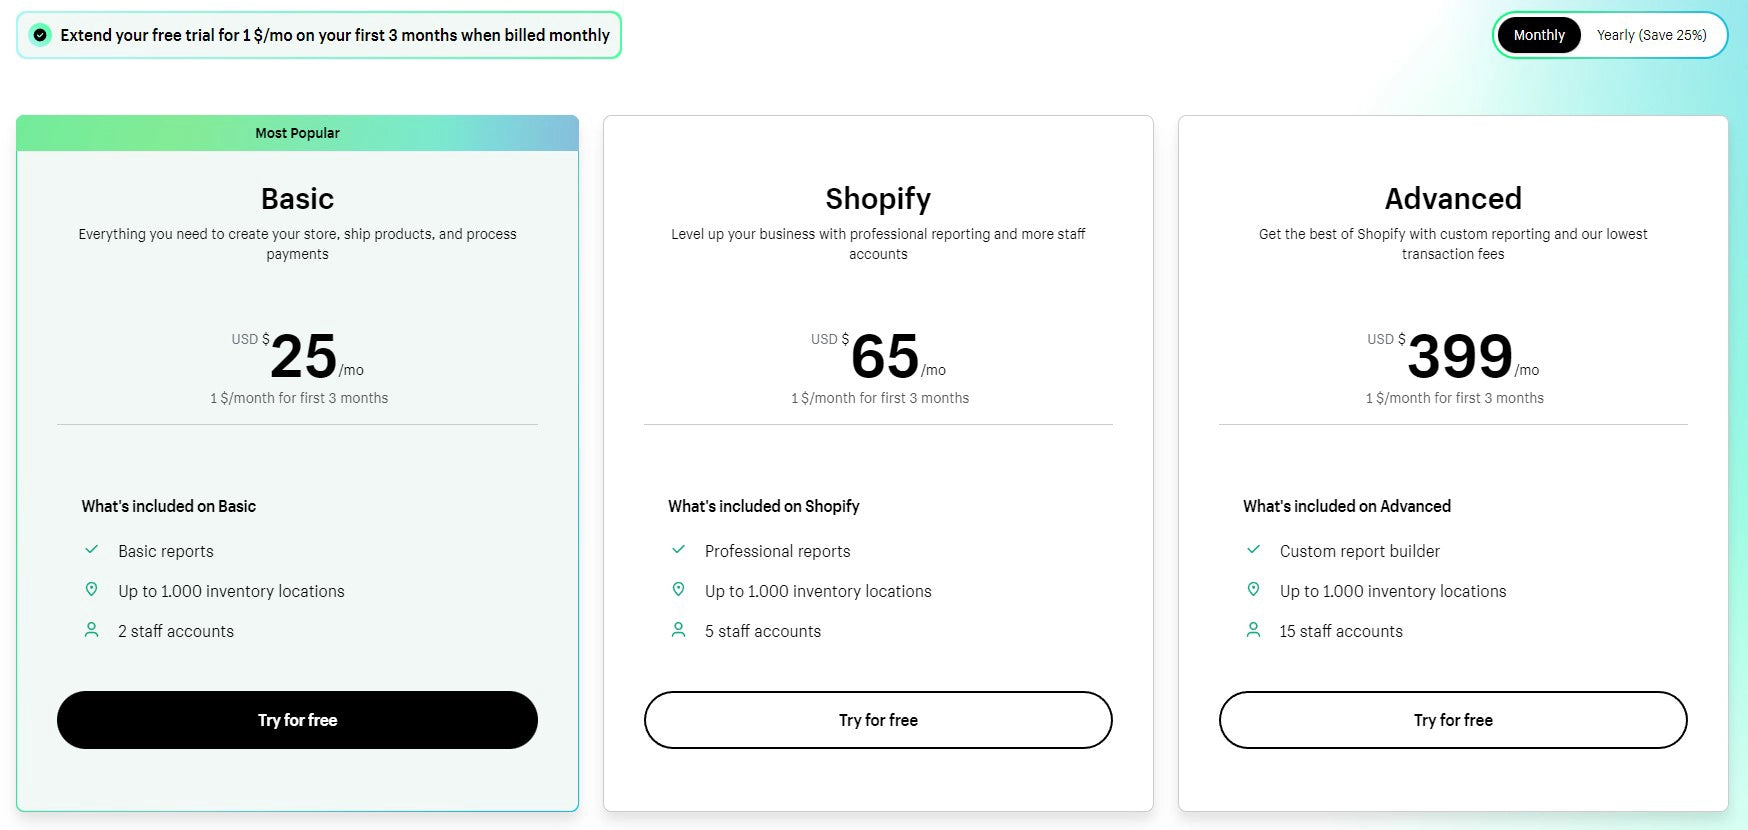 Shopify’s pricing plans